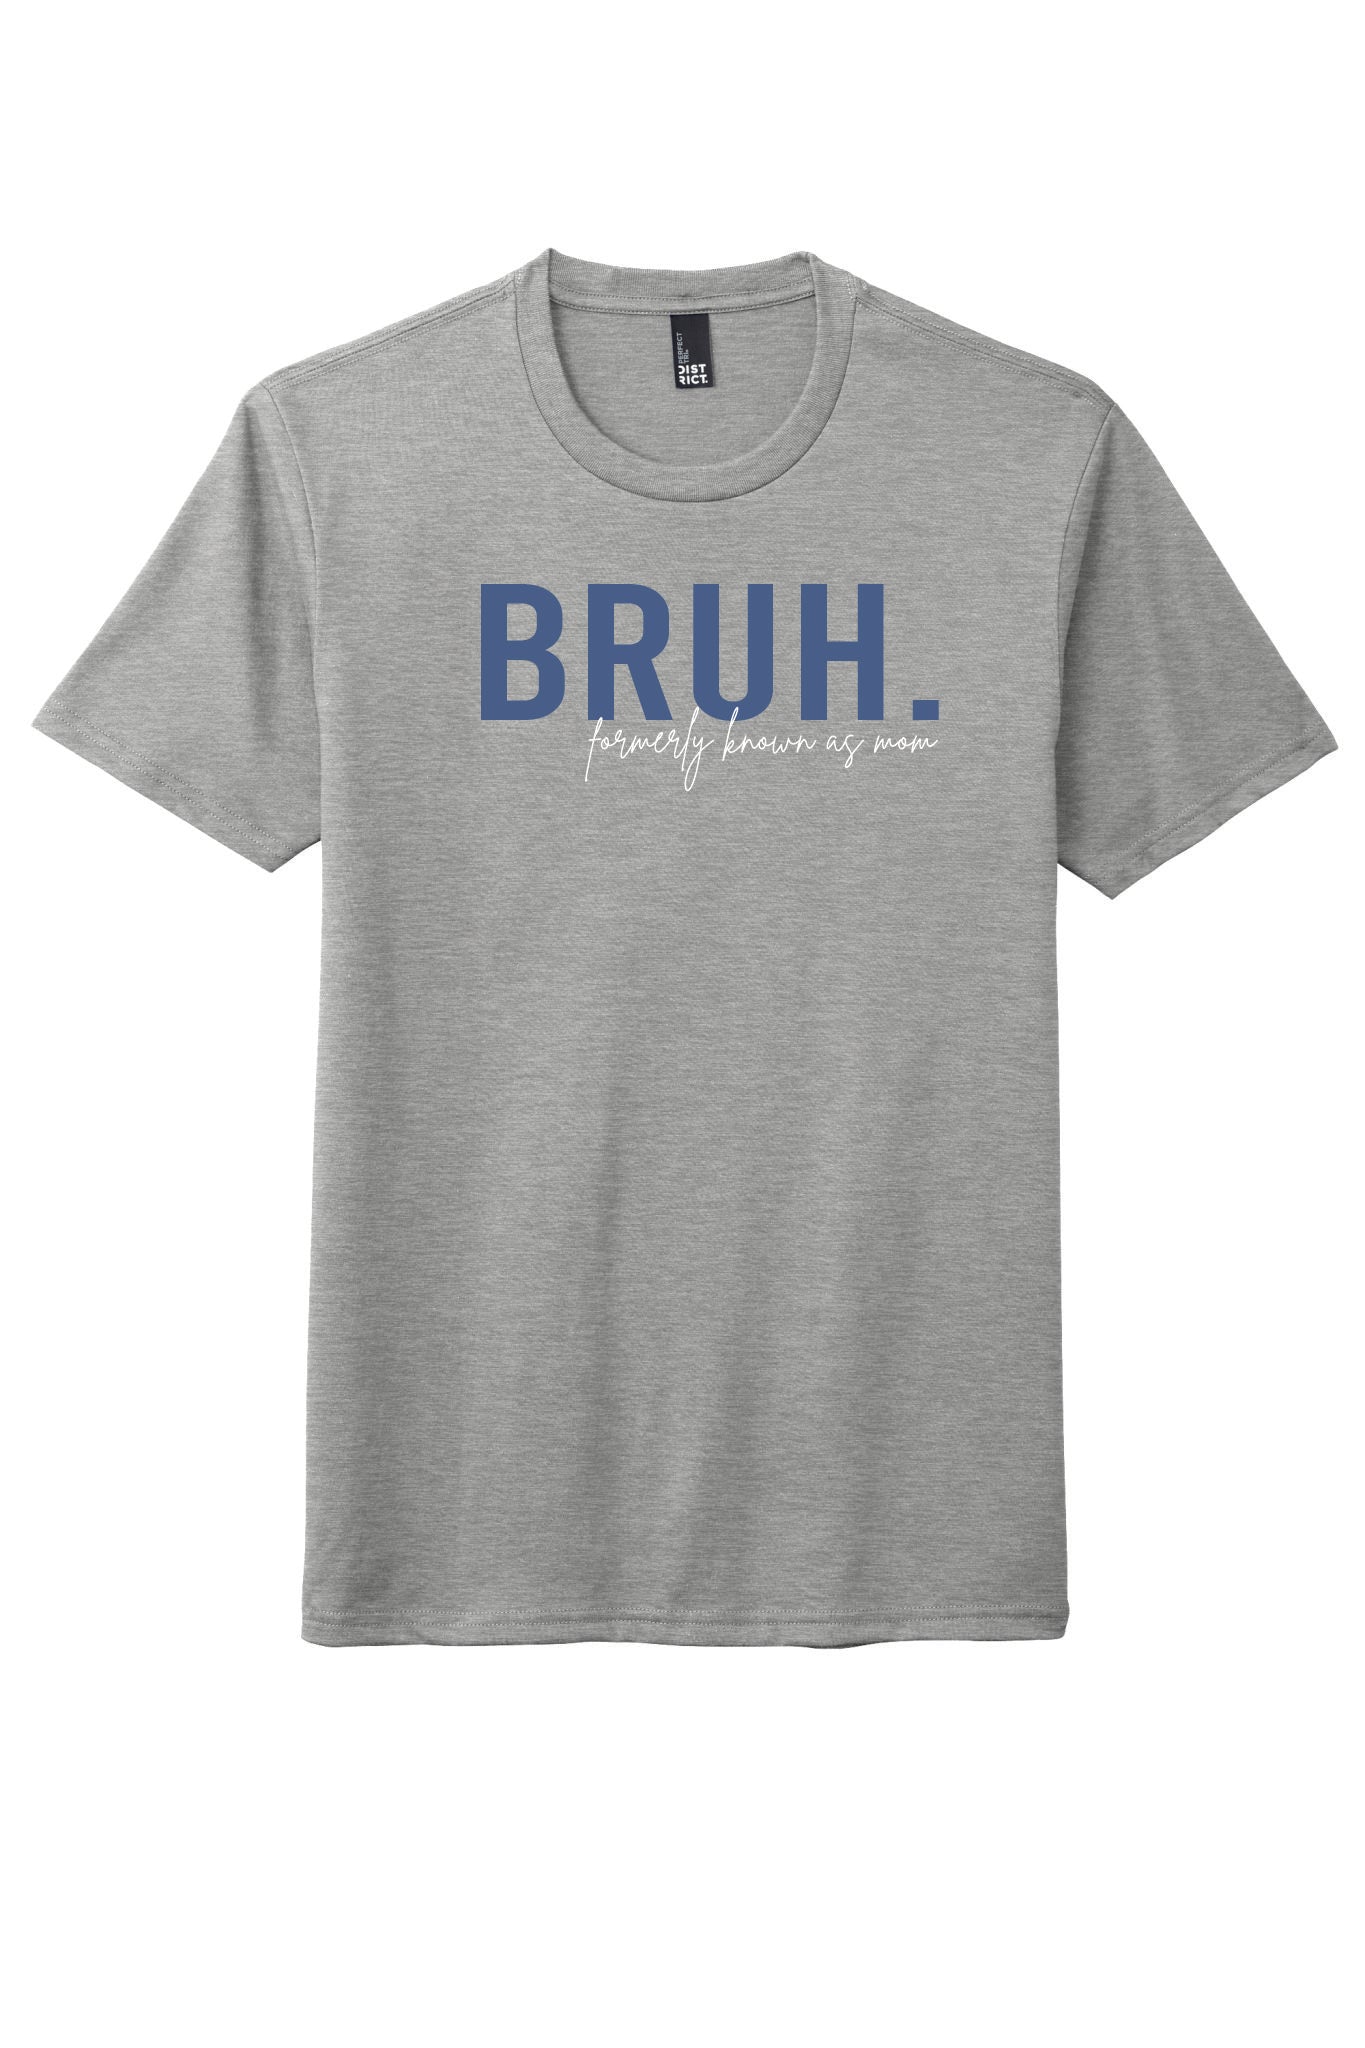 BRUH. formerly known as mom T-Shirt